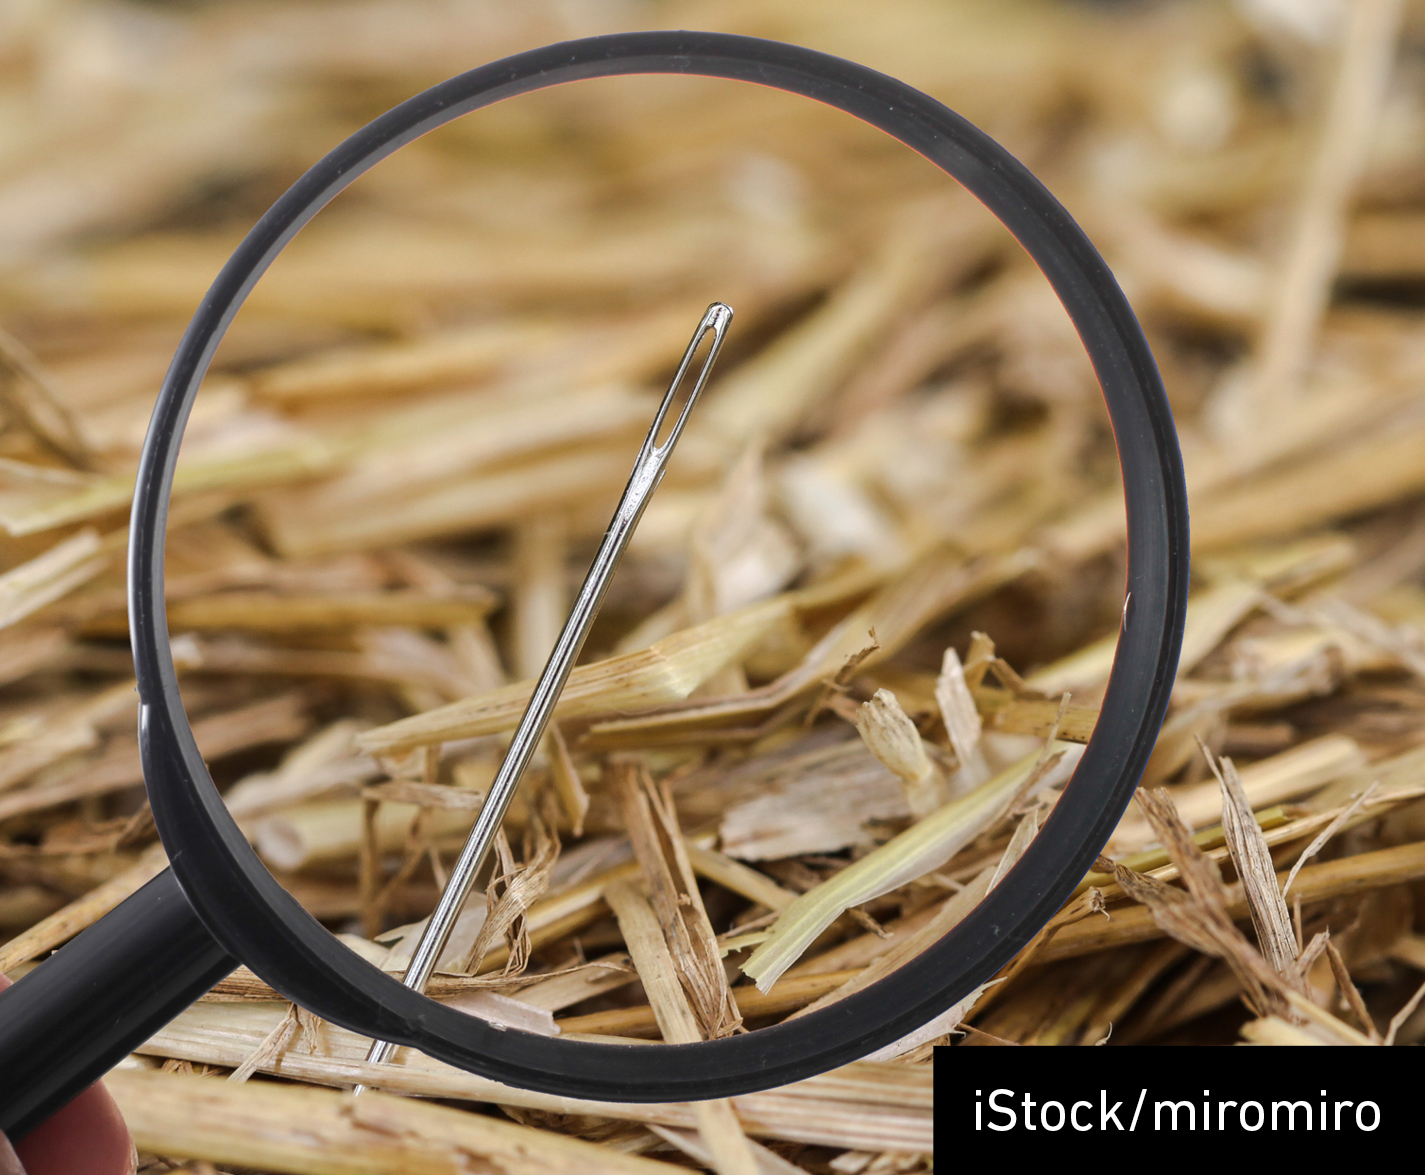 Looking through a magnifying glass at a needle on some hay